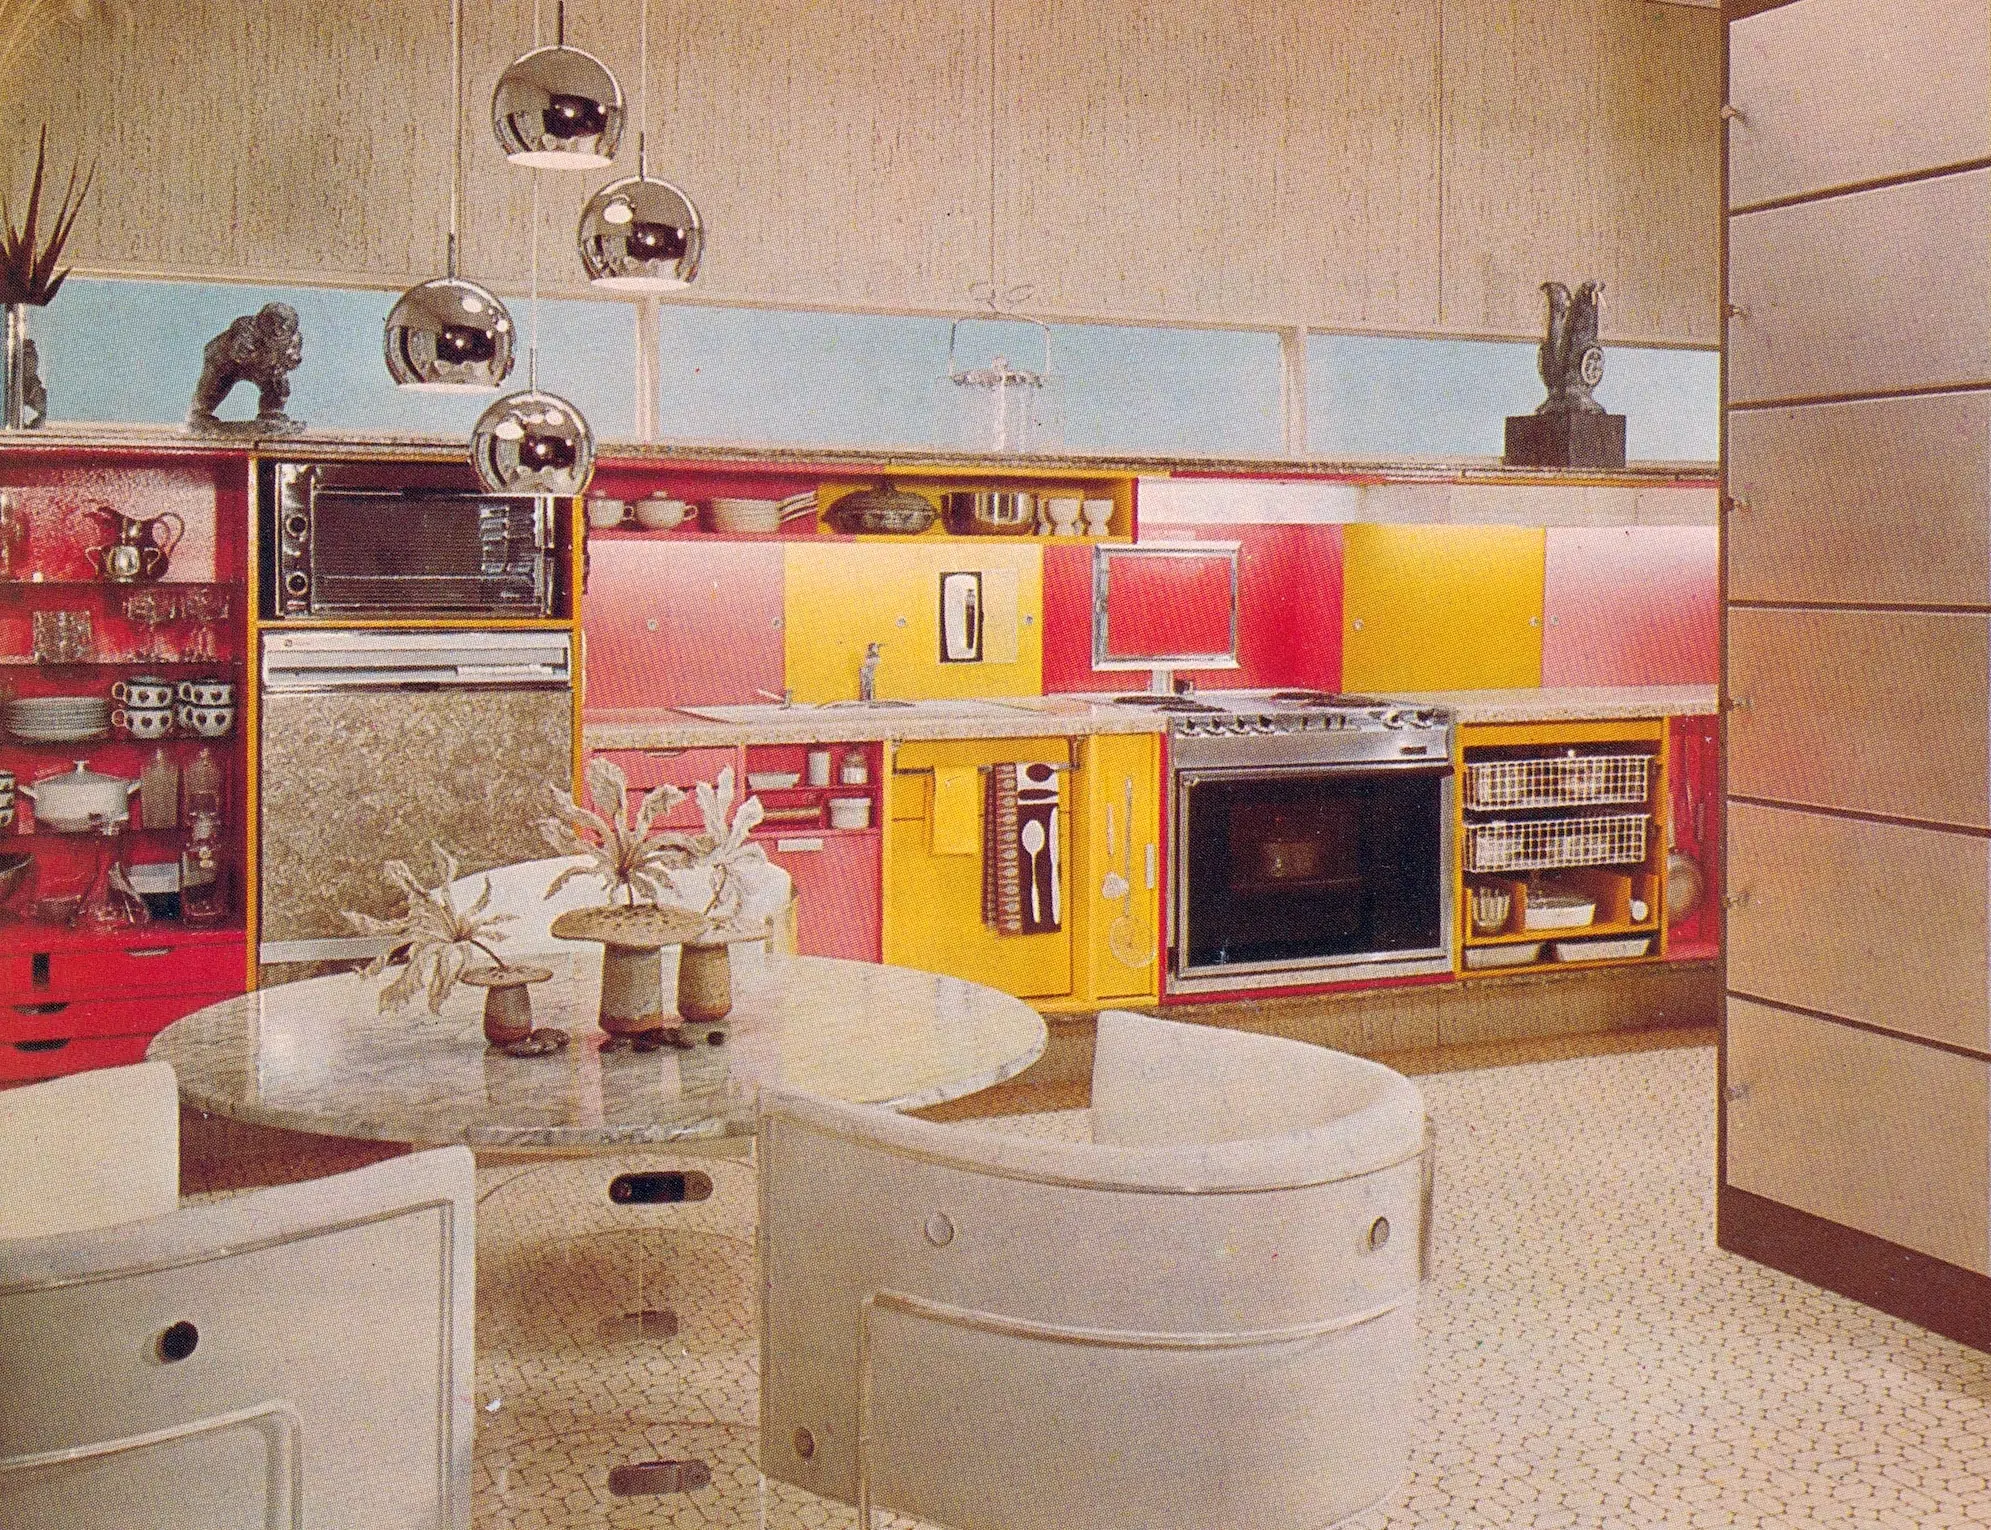 Techicolor kitchen fantasia featured in the 1975 Better Homes Decorating Book.